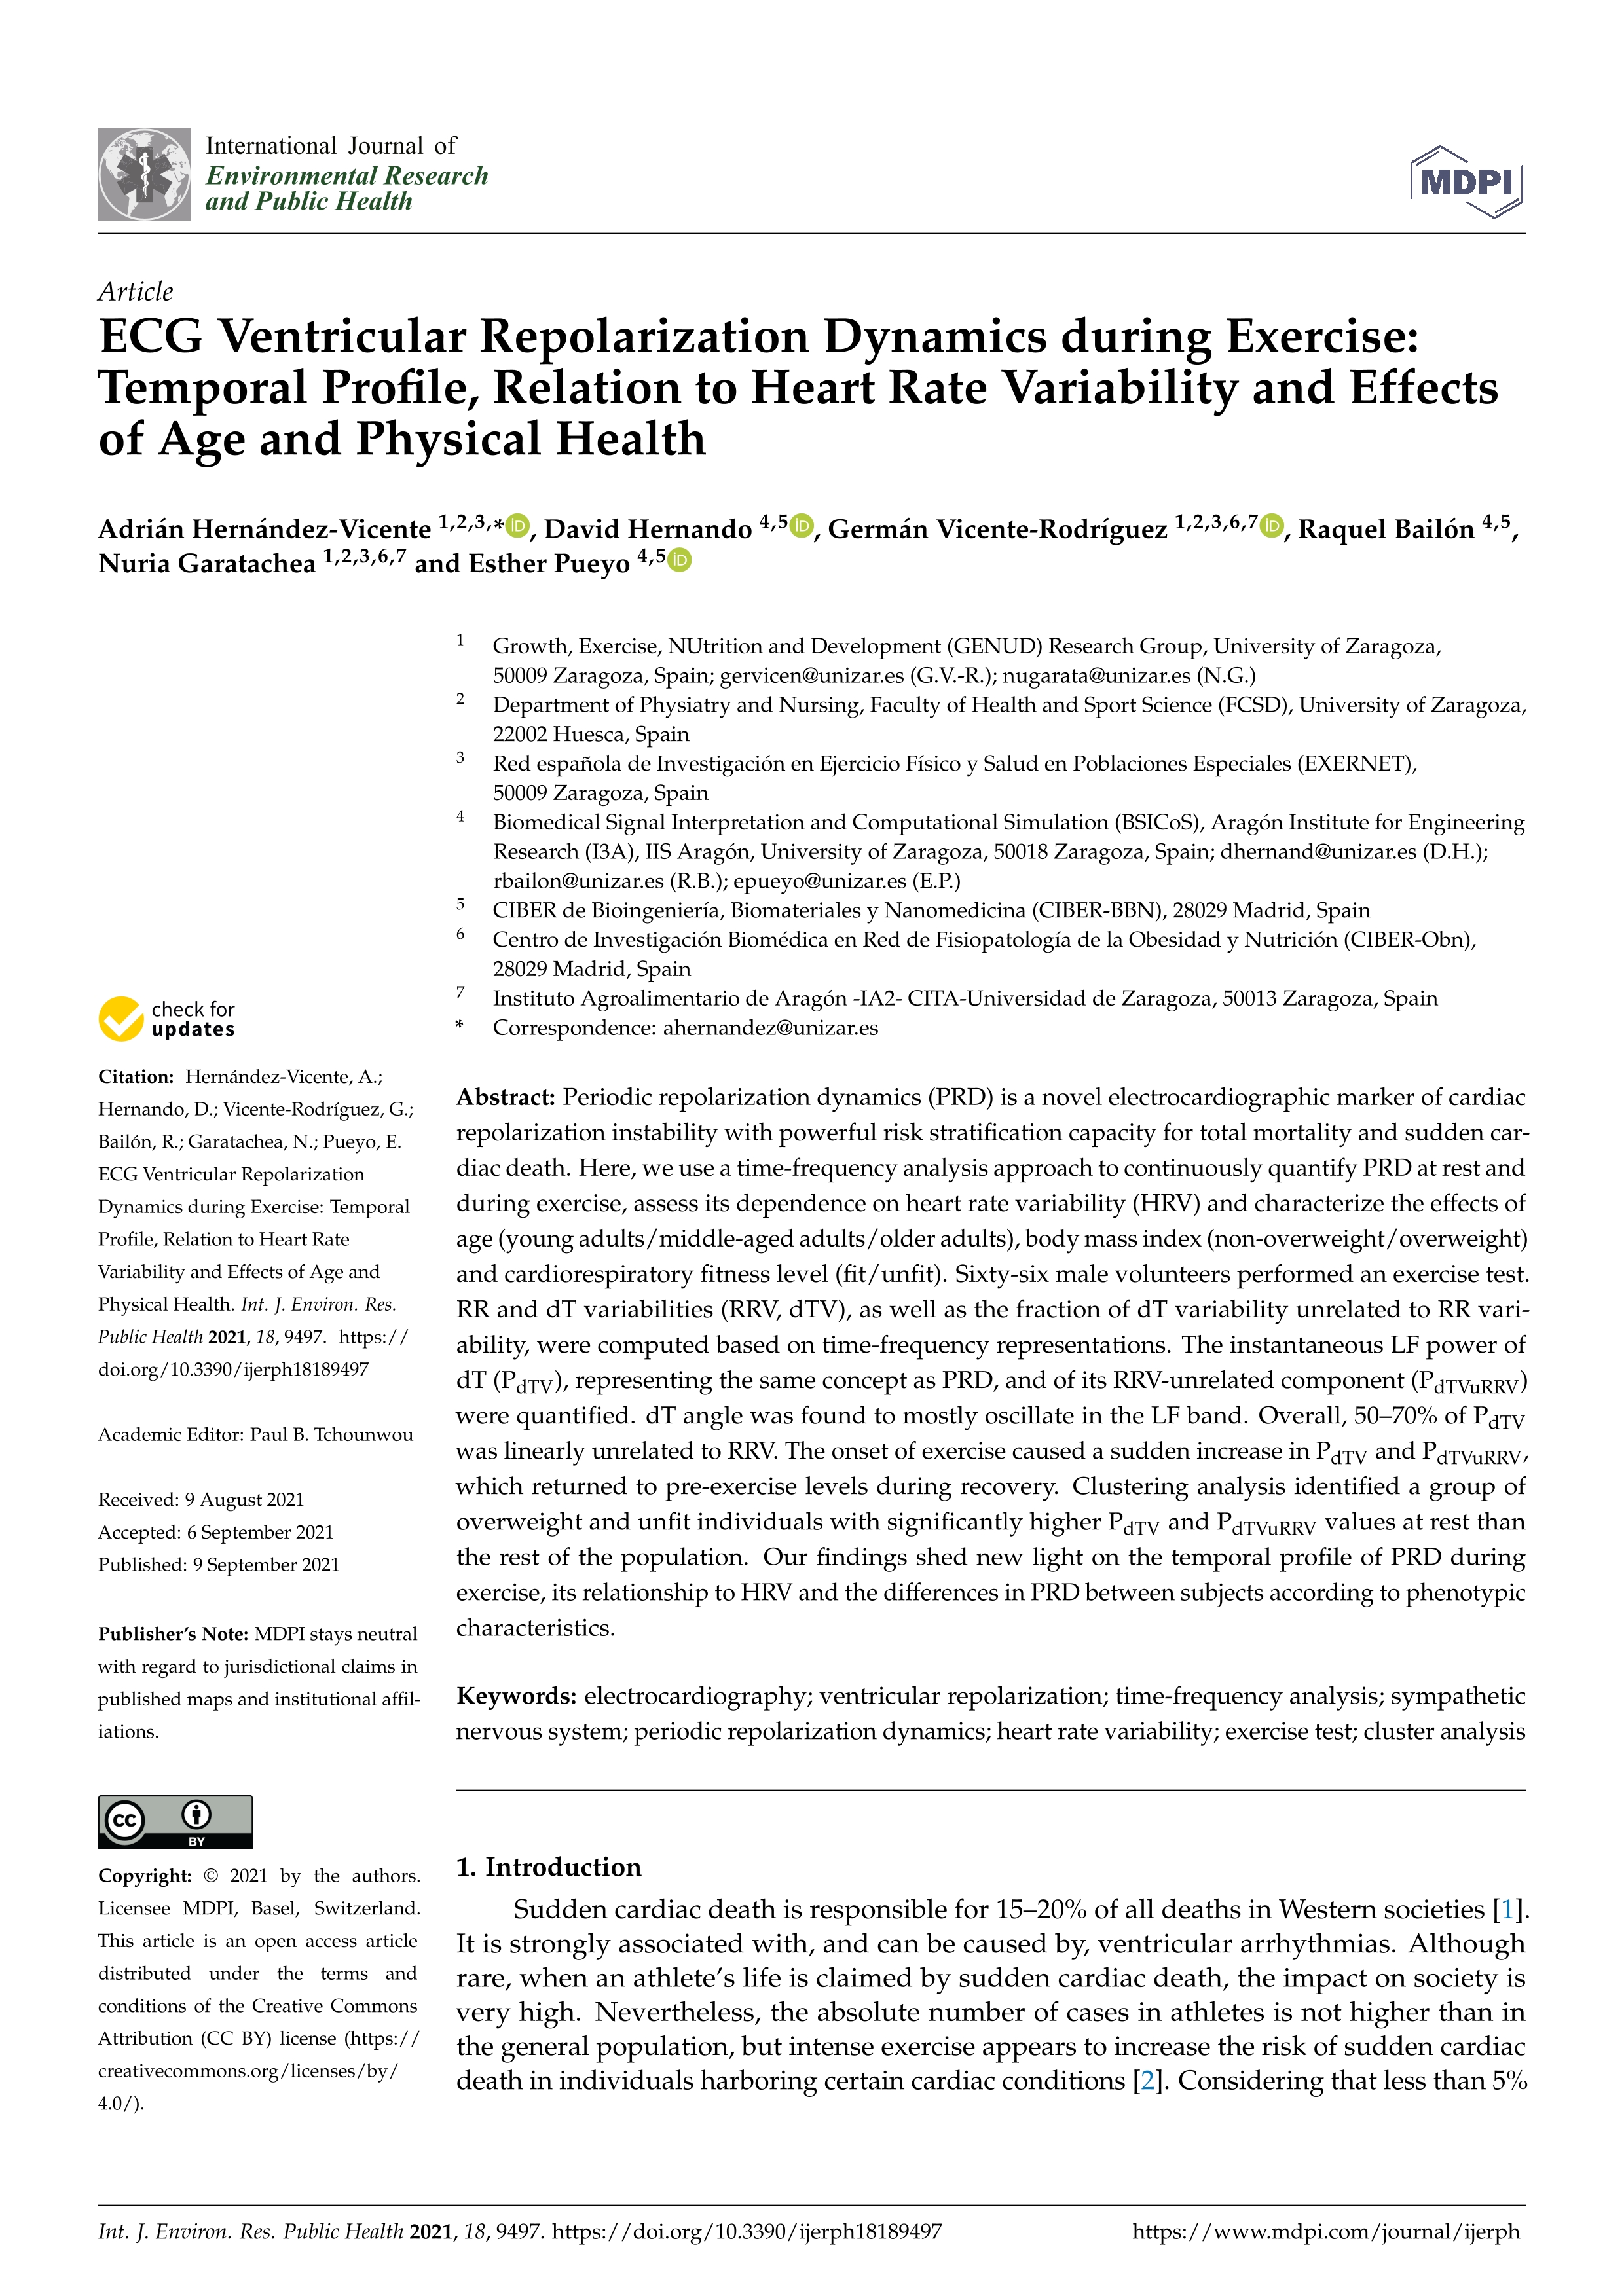 ECG ventricular repolarization dynamics during exercise: Temporal profile, relation to heart rate variability and effects of age and physical health